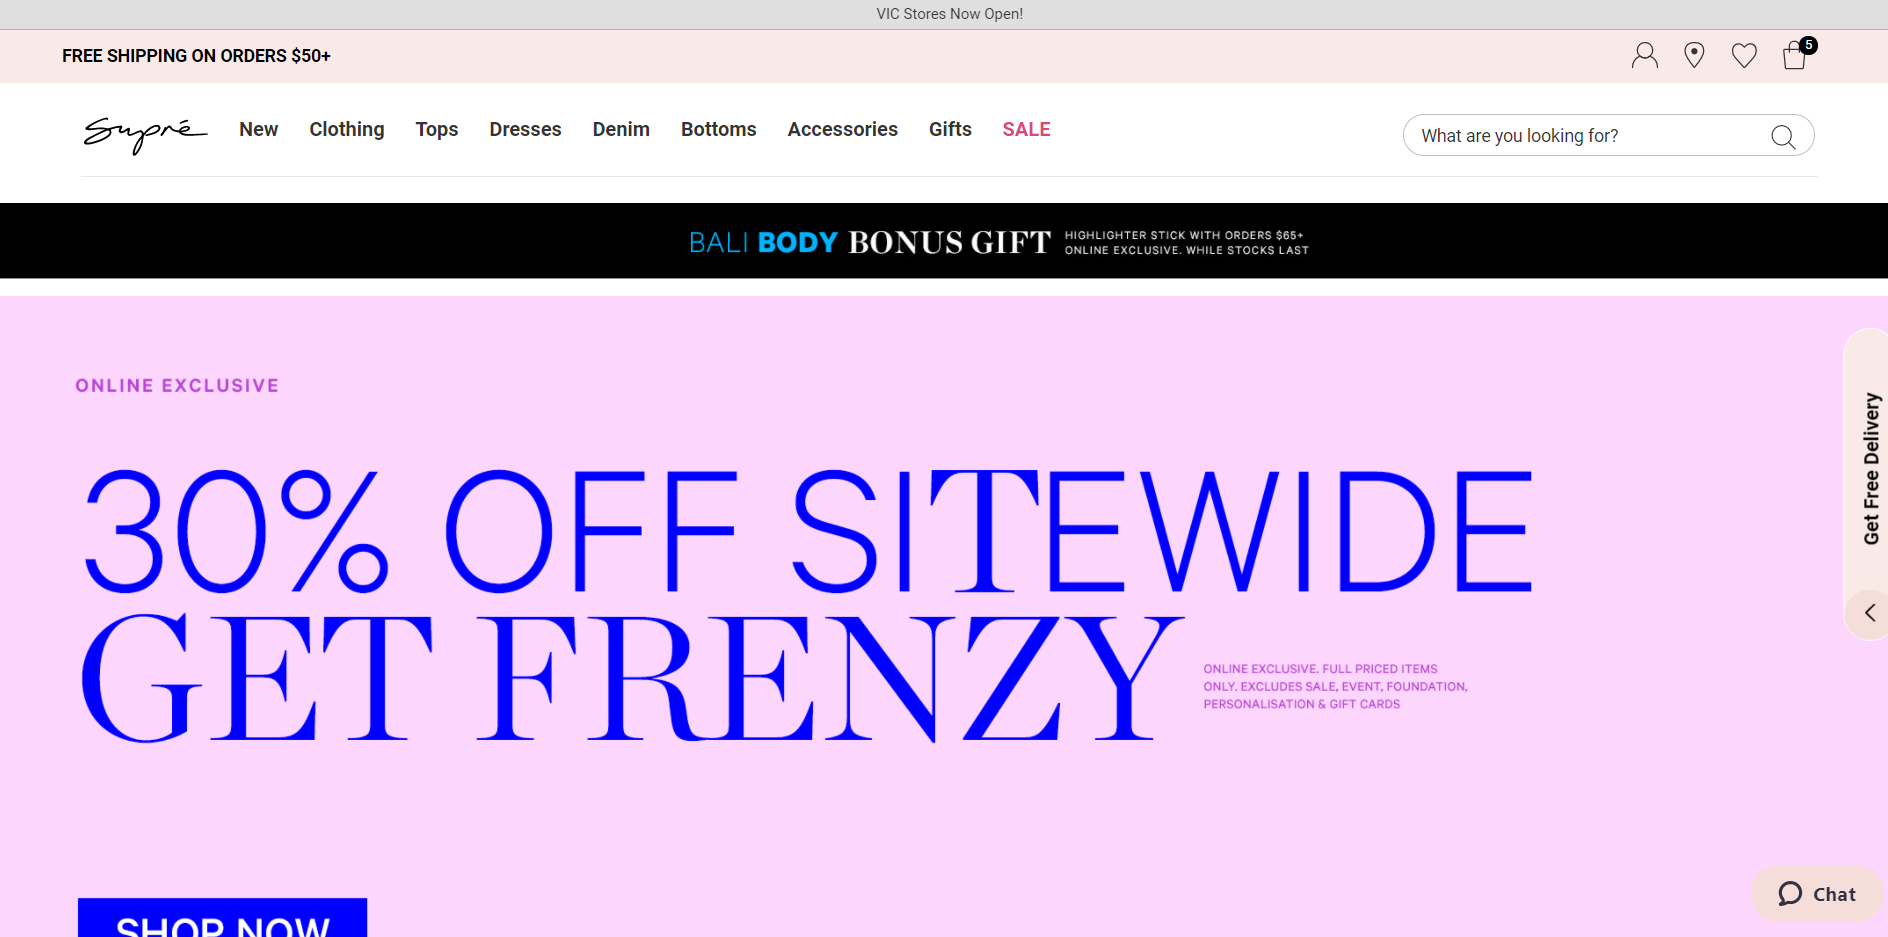 Supre Frenzy sale 30% OFF on full price styles. Save on Online exclusives